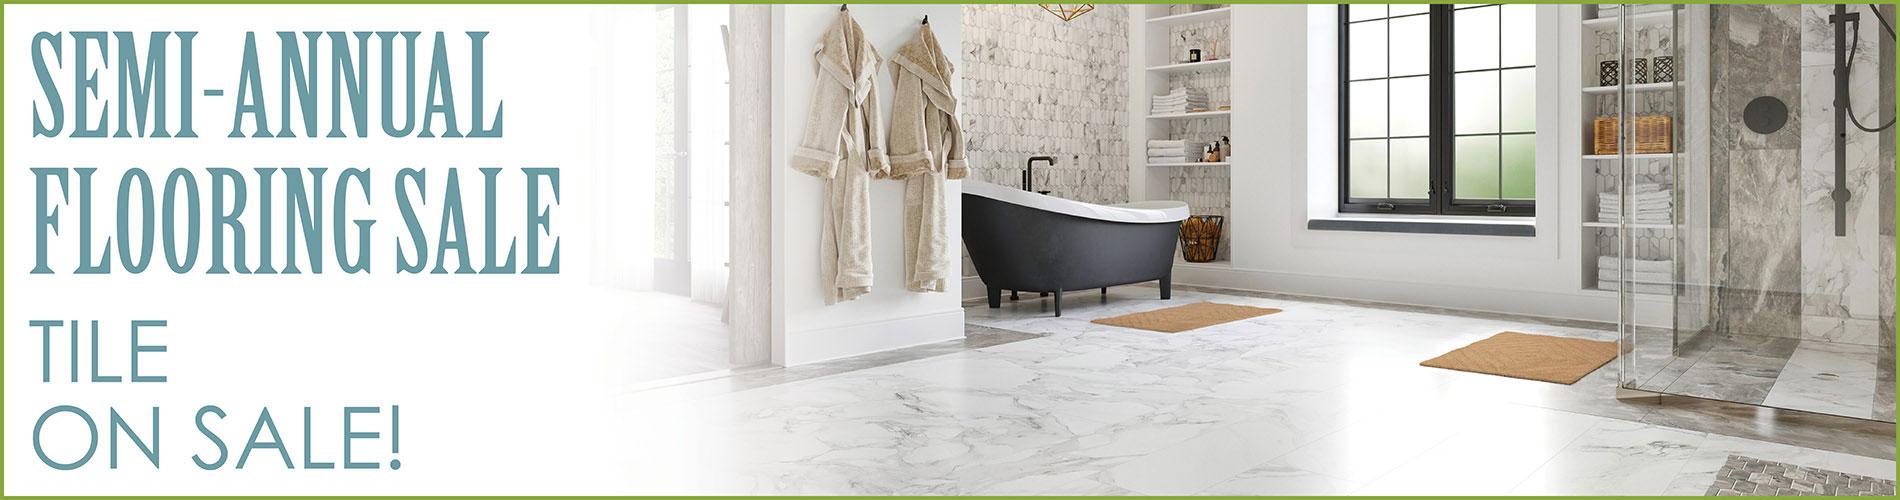 Tile on Sale during our Semi-Annual Flooring Sale 